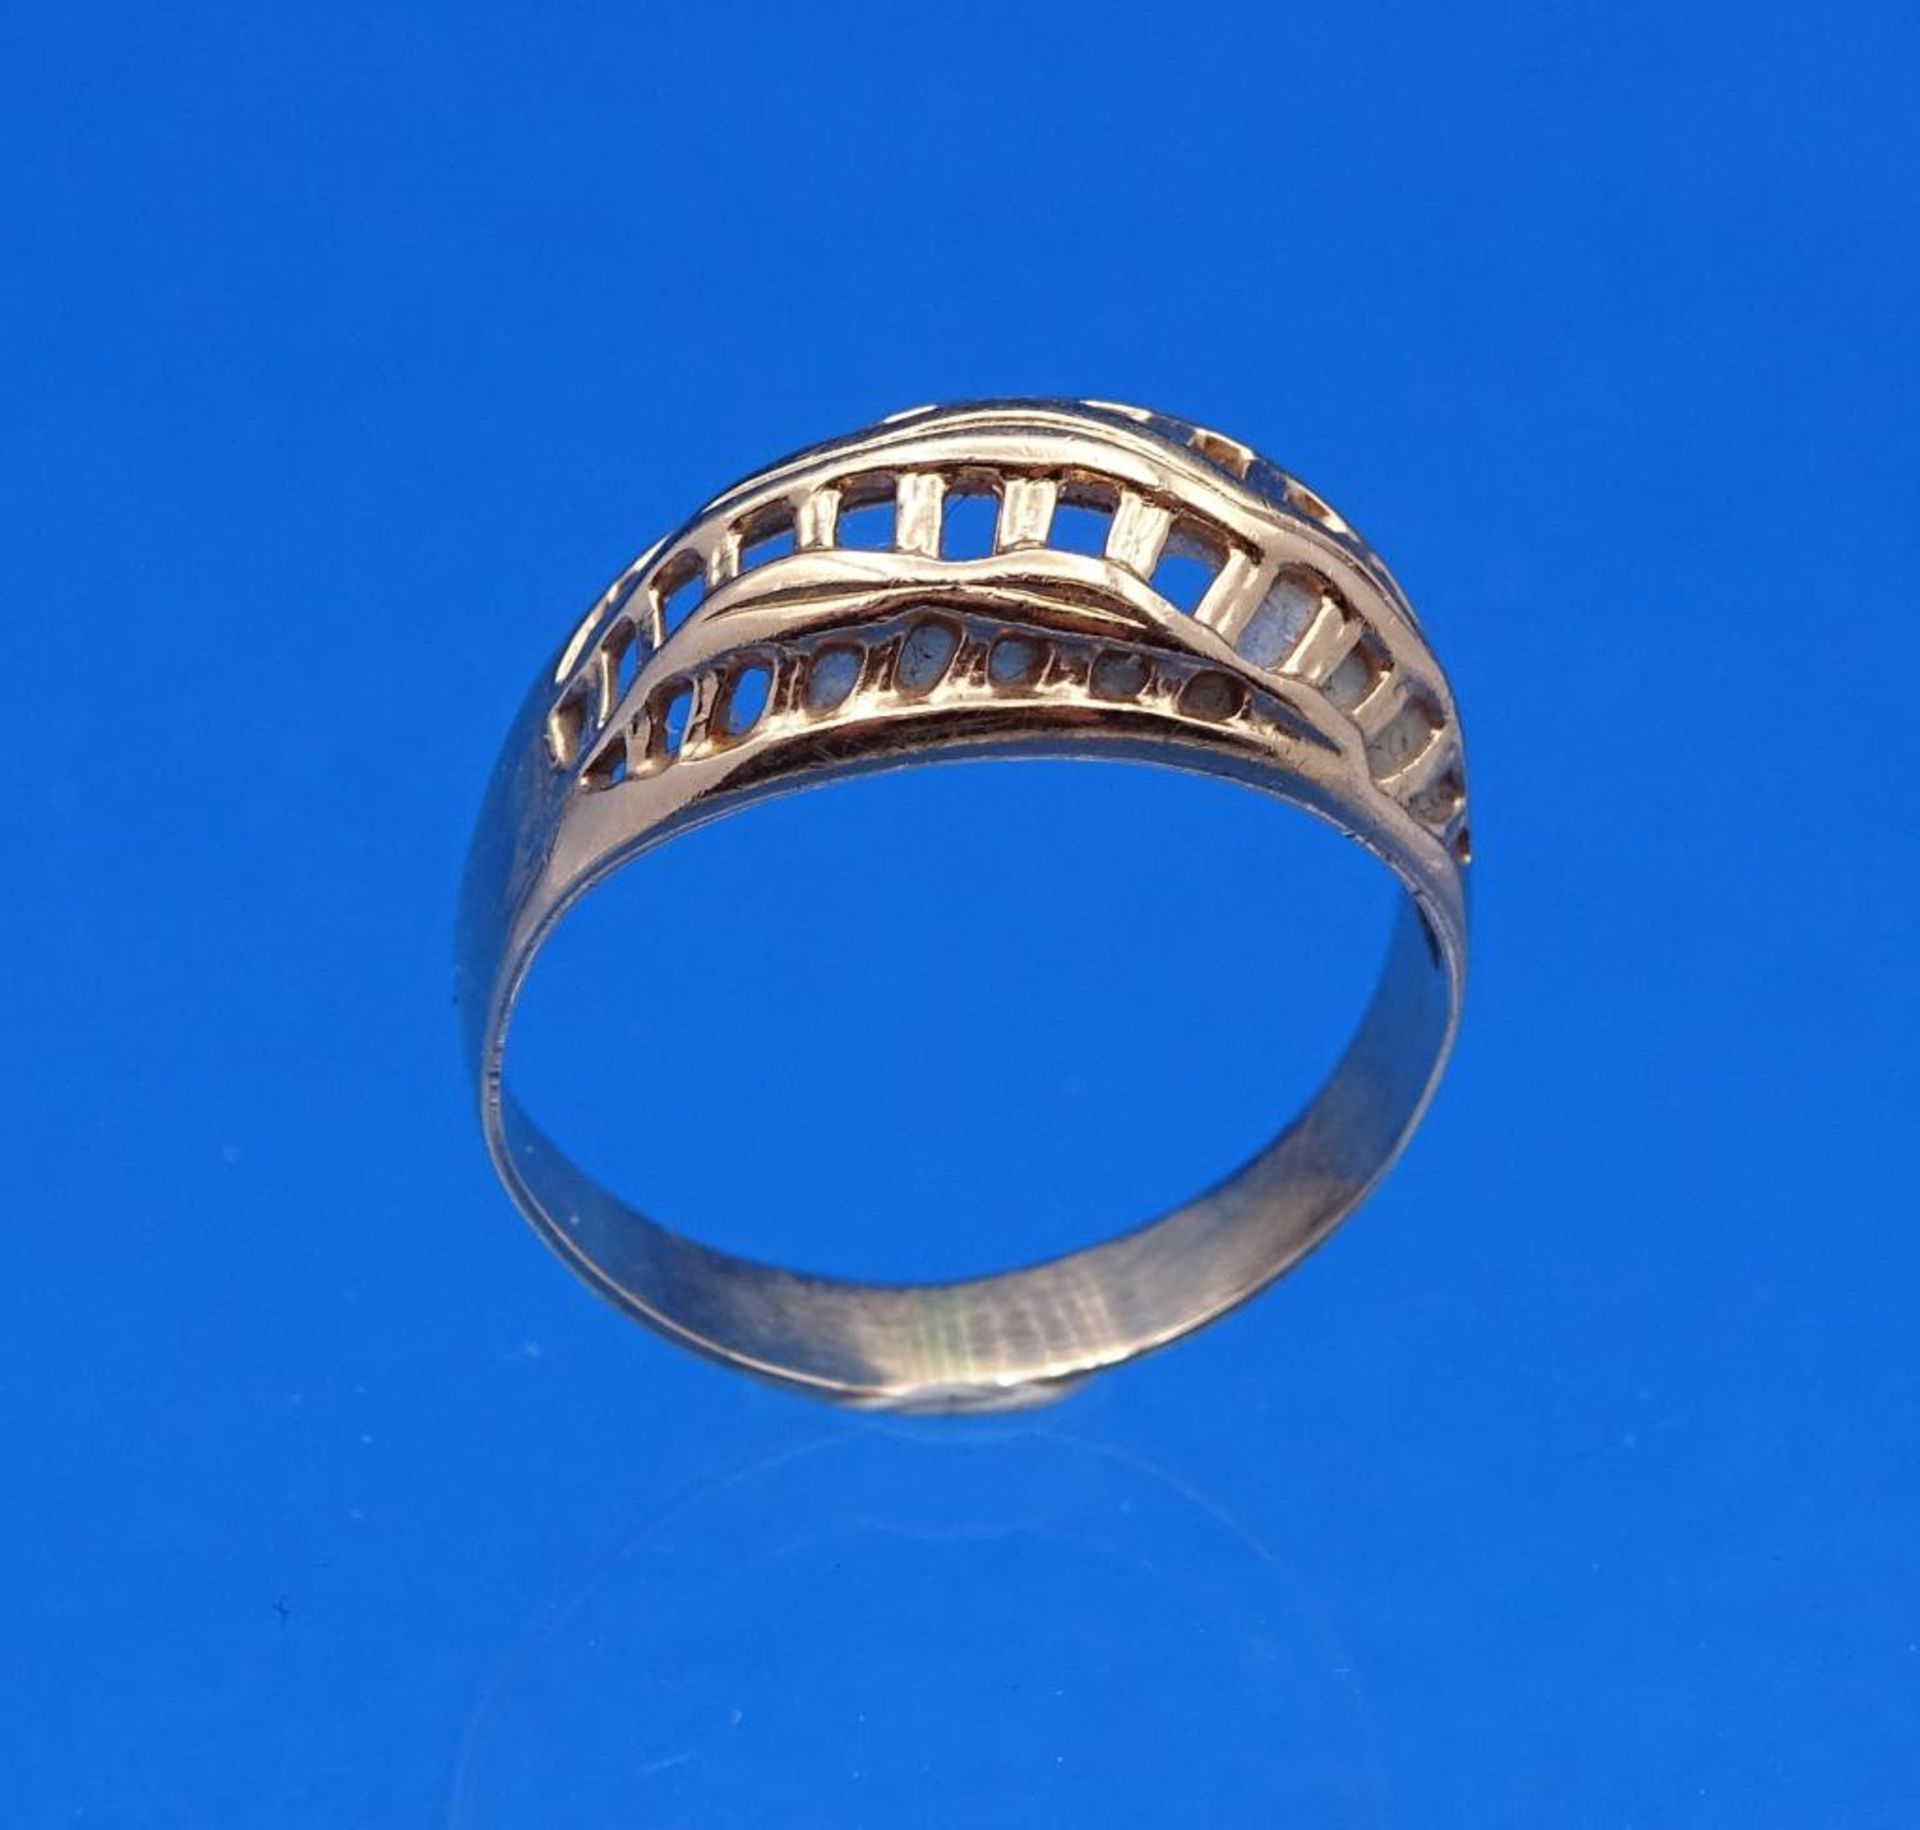 Ring, Rotgold 585/000, durchbrochene Arbeit, 2,7gr., RG 56/57 - Image 3 of 4